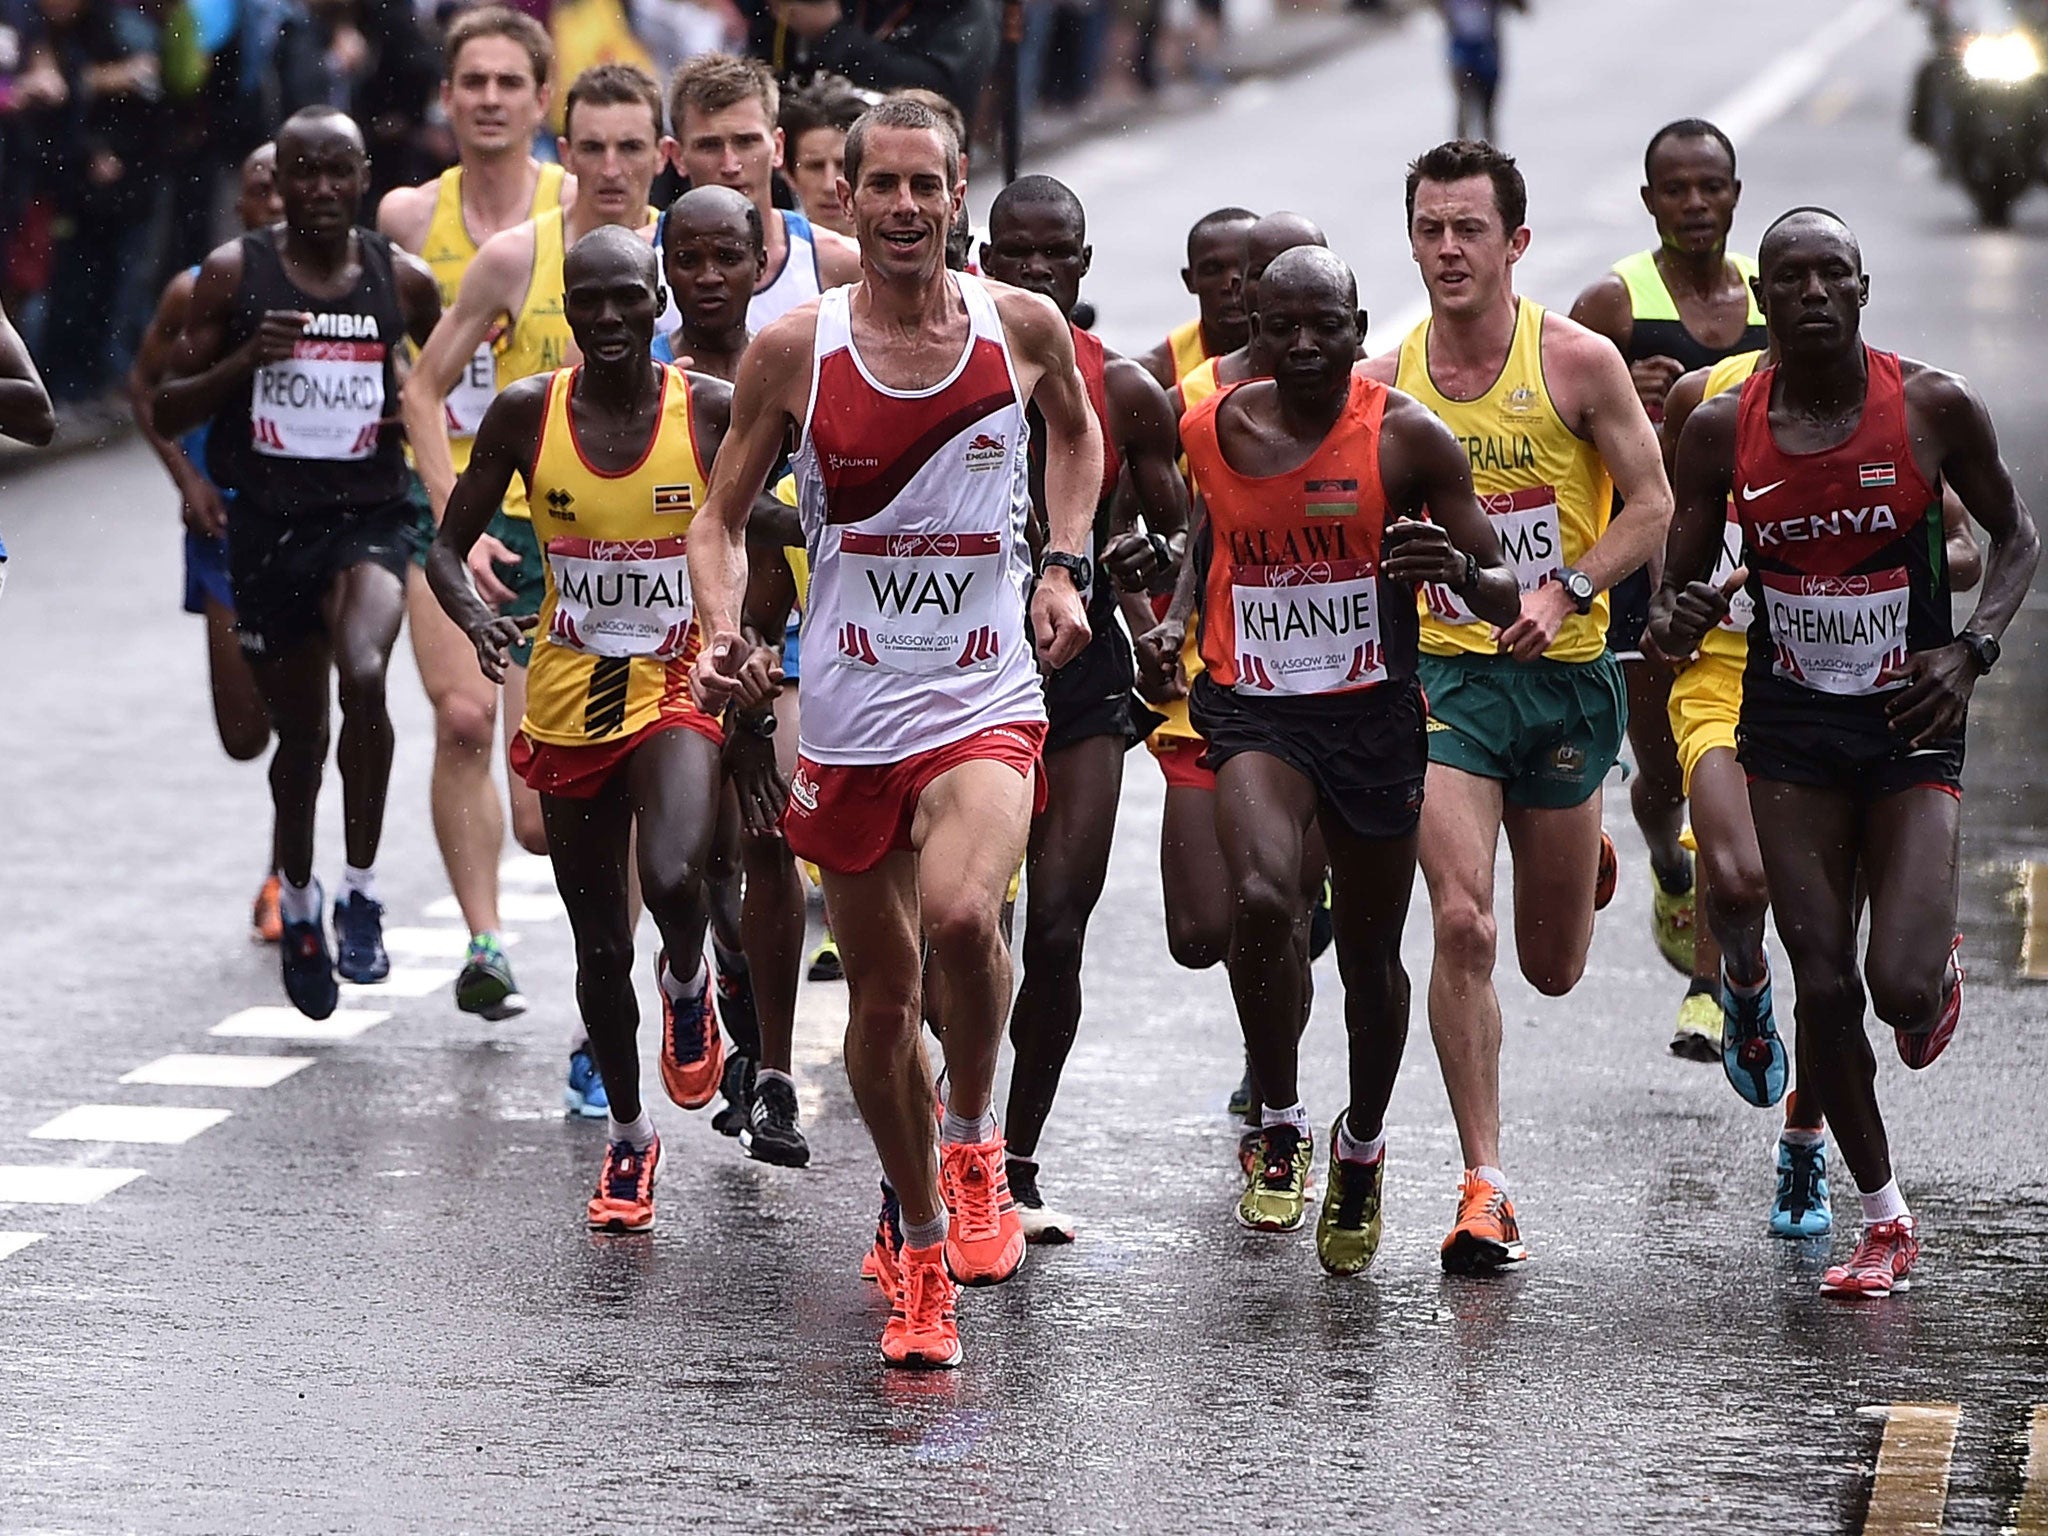 Steve Way leading the marathon, before finishing 10th, the top English runner